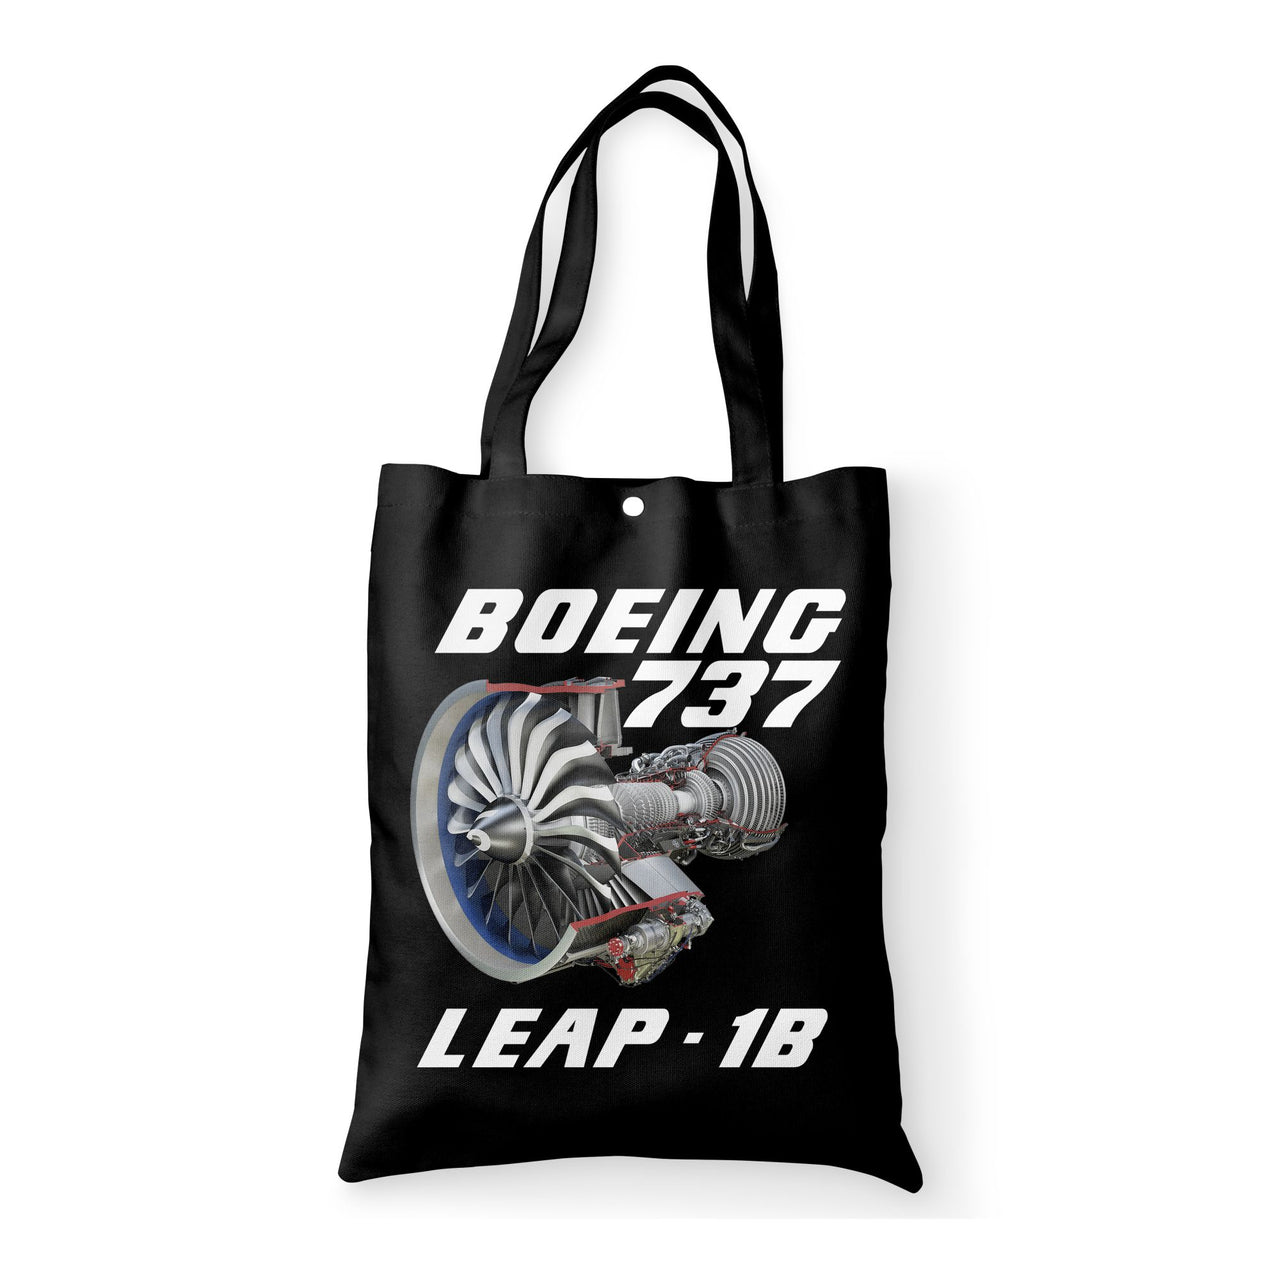 Boeing 737 & Leap 1B Designed Tote Bags